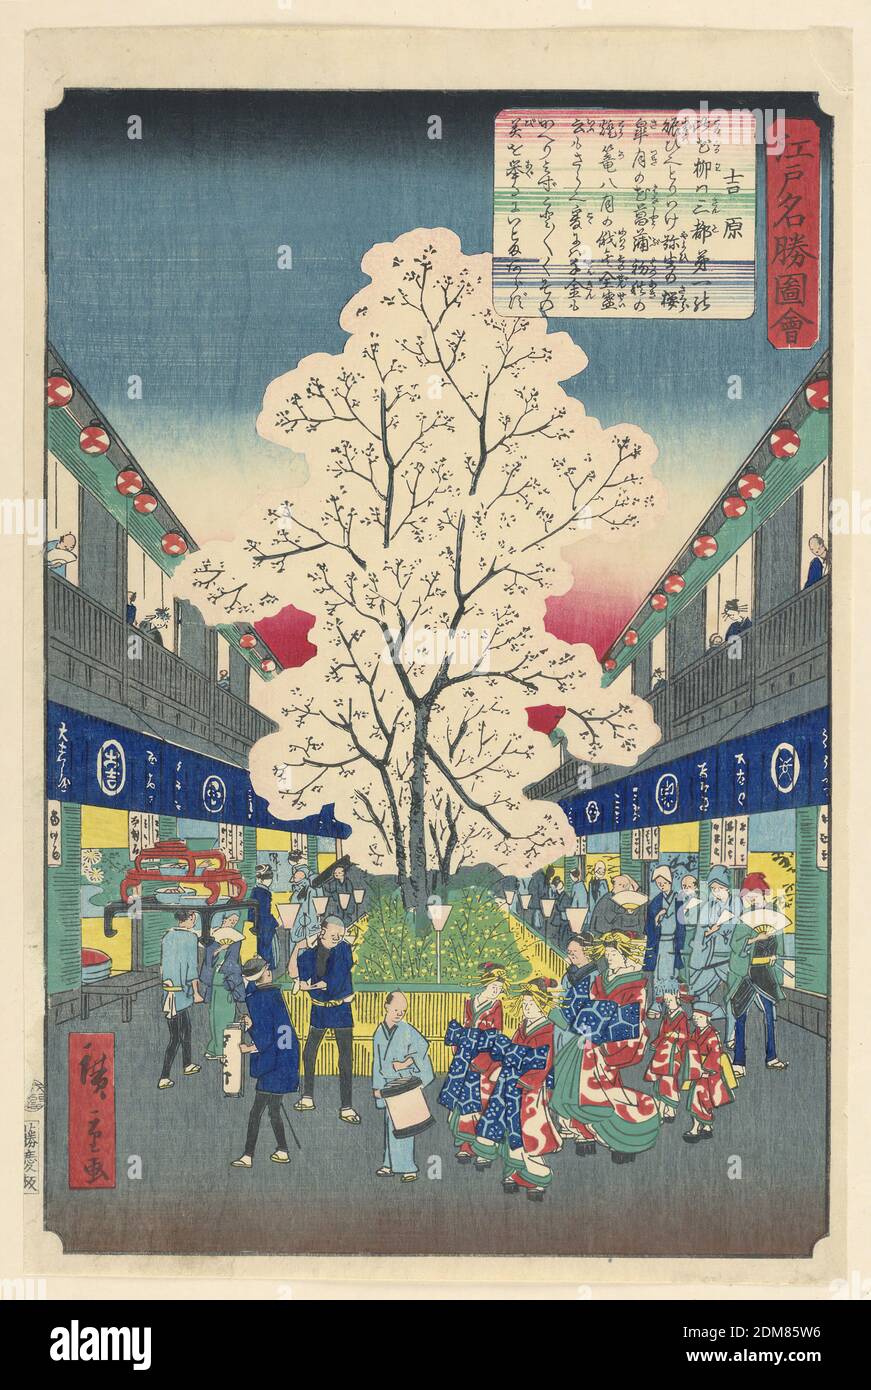 Spring Festival, Ando Hiroshige, Japanese, 1797–1858, Woodblock print in colored ink on paper, This brilliant street scene of Edo is decorated with a blooming cherry blossom. Celebrating all around the base of the tree is a parade of people dressed in traditional clothing. All the storefronts are open with their signs and lit with lanterns., Japan, 1797-1858, landscapes, Print Stock Photo